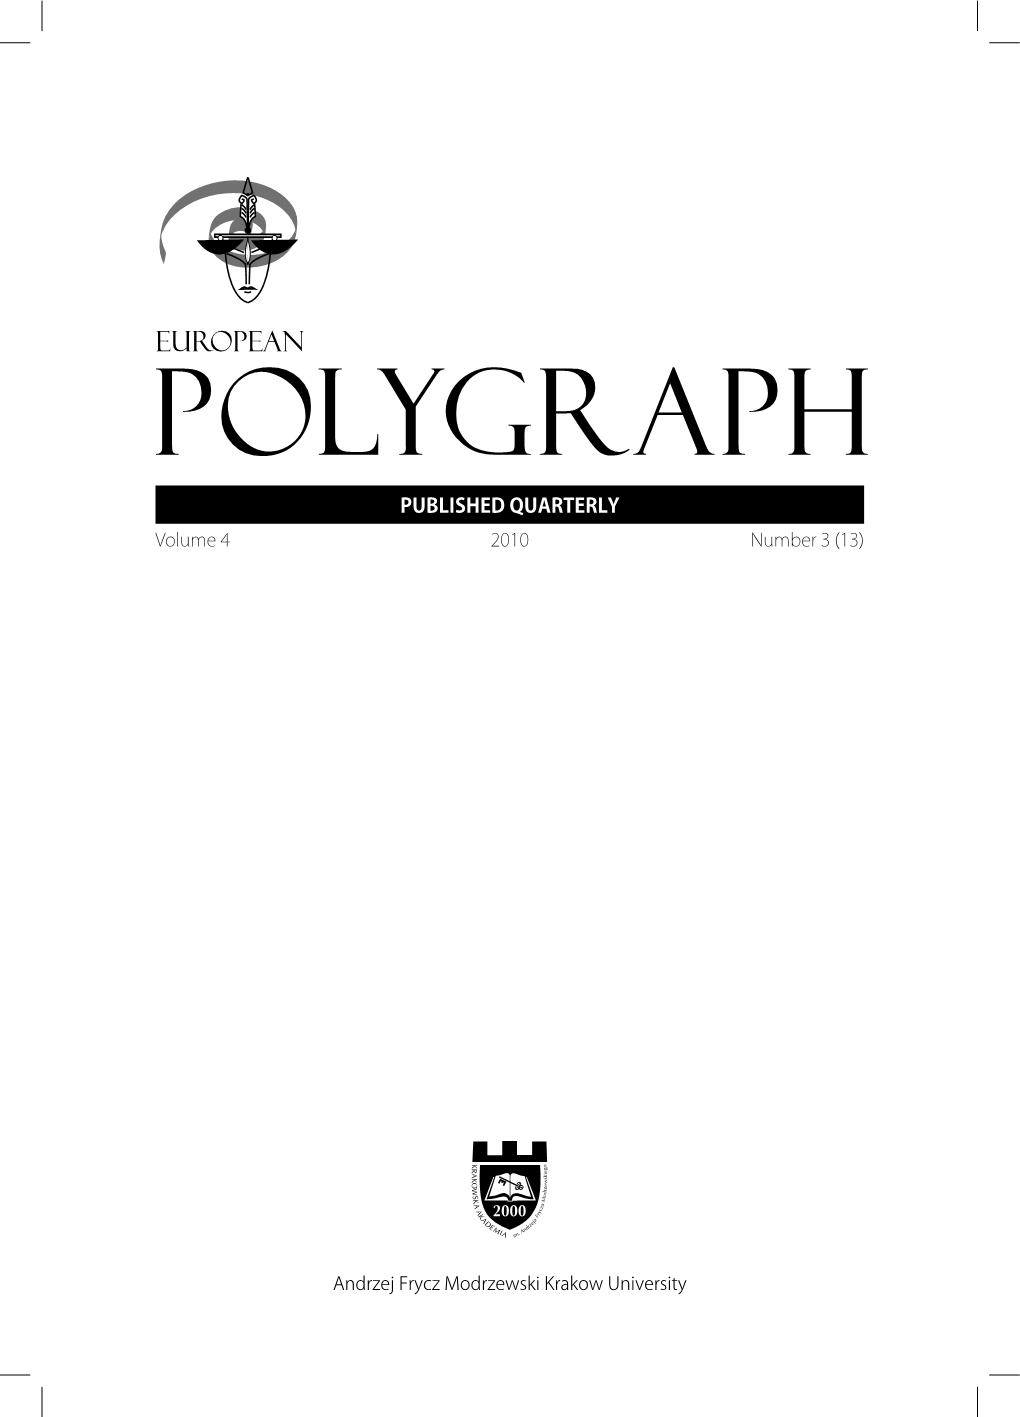 Review of Materials and Proceedings from Conference on Using the Polygraph in Forensic and Human Resource Studies